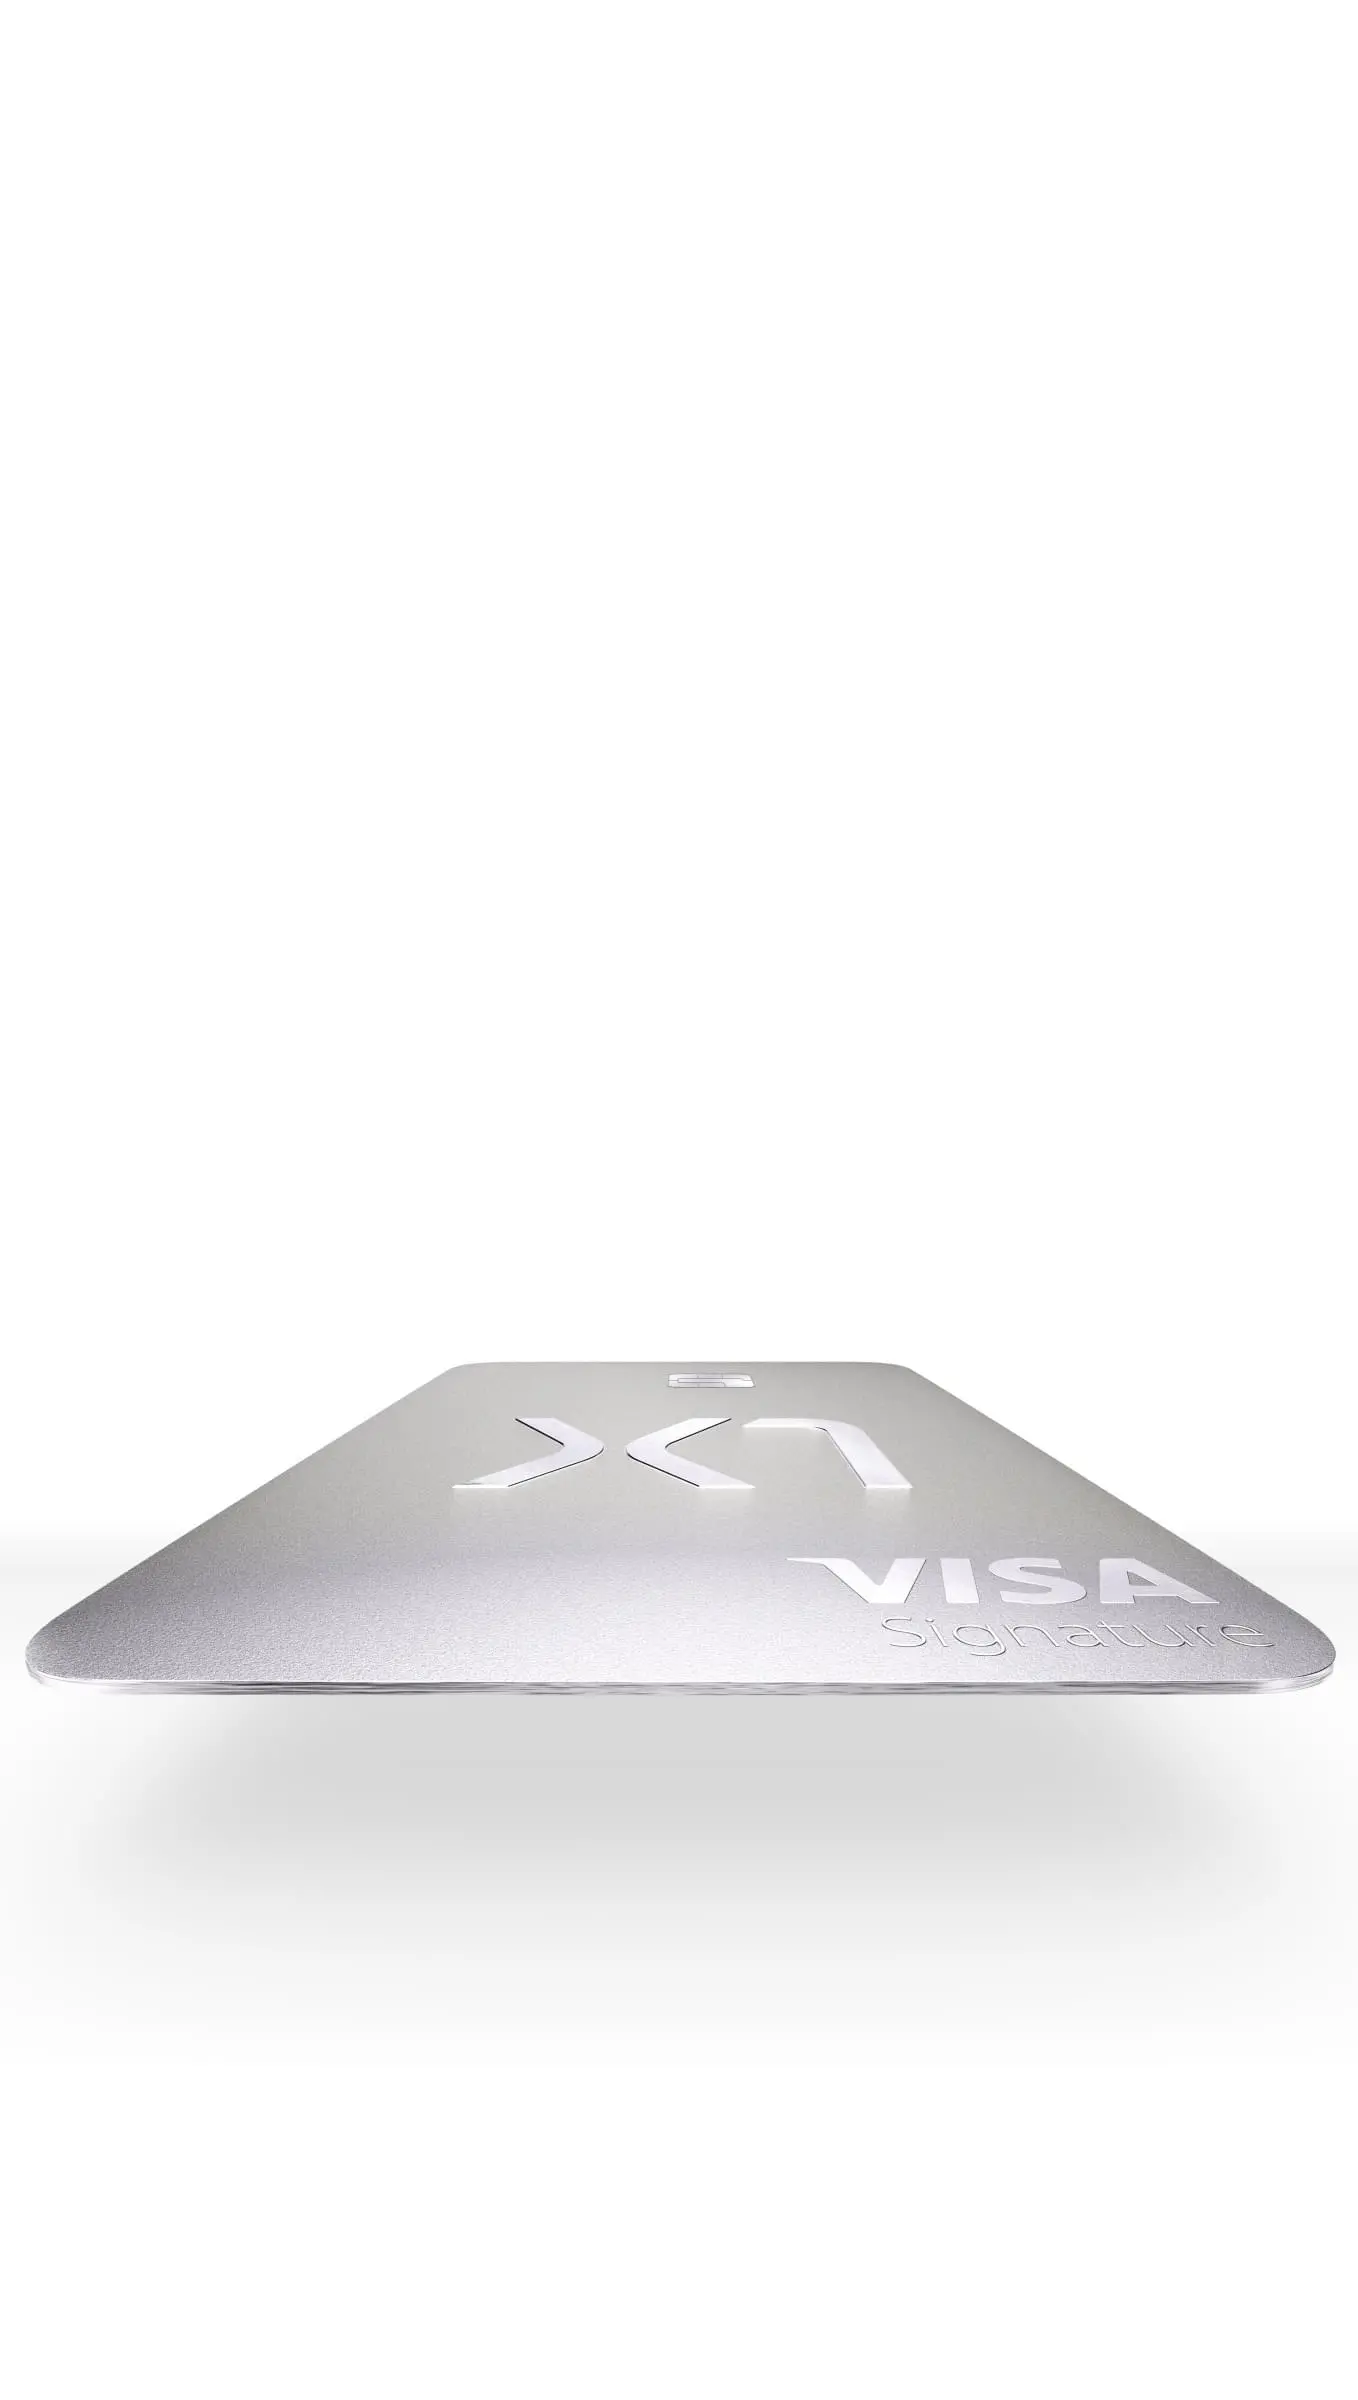 X1 Card The Smartest Credit Card Ever Made